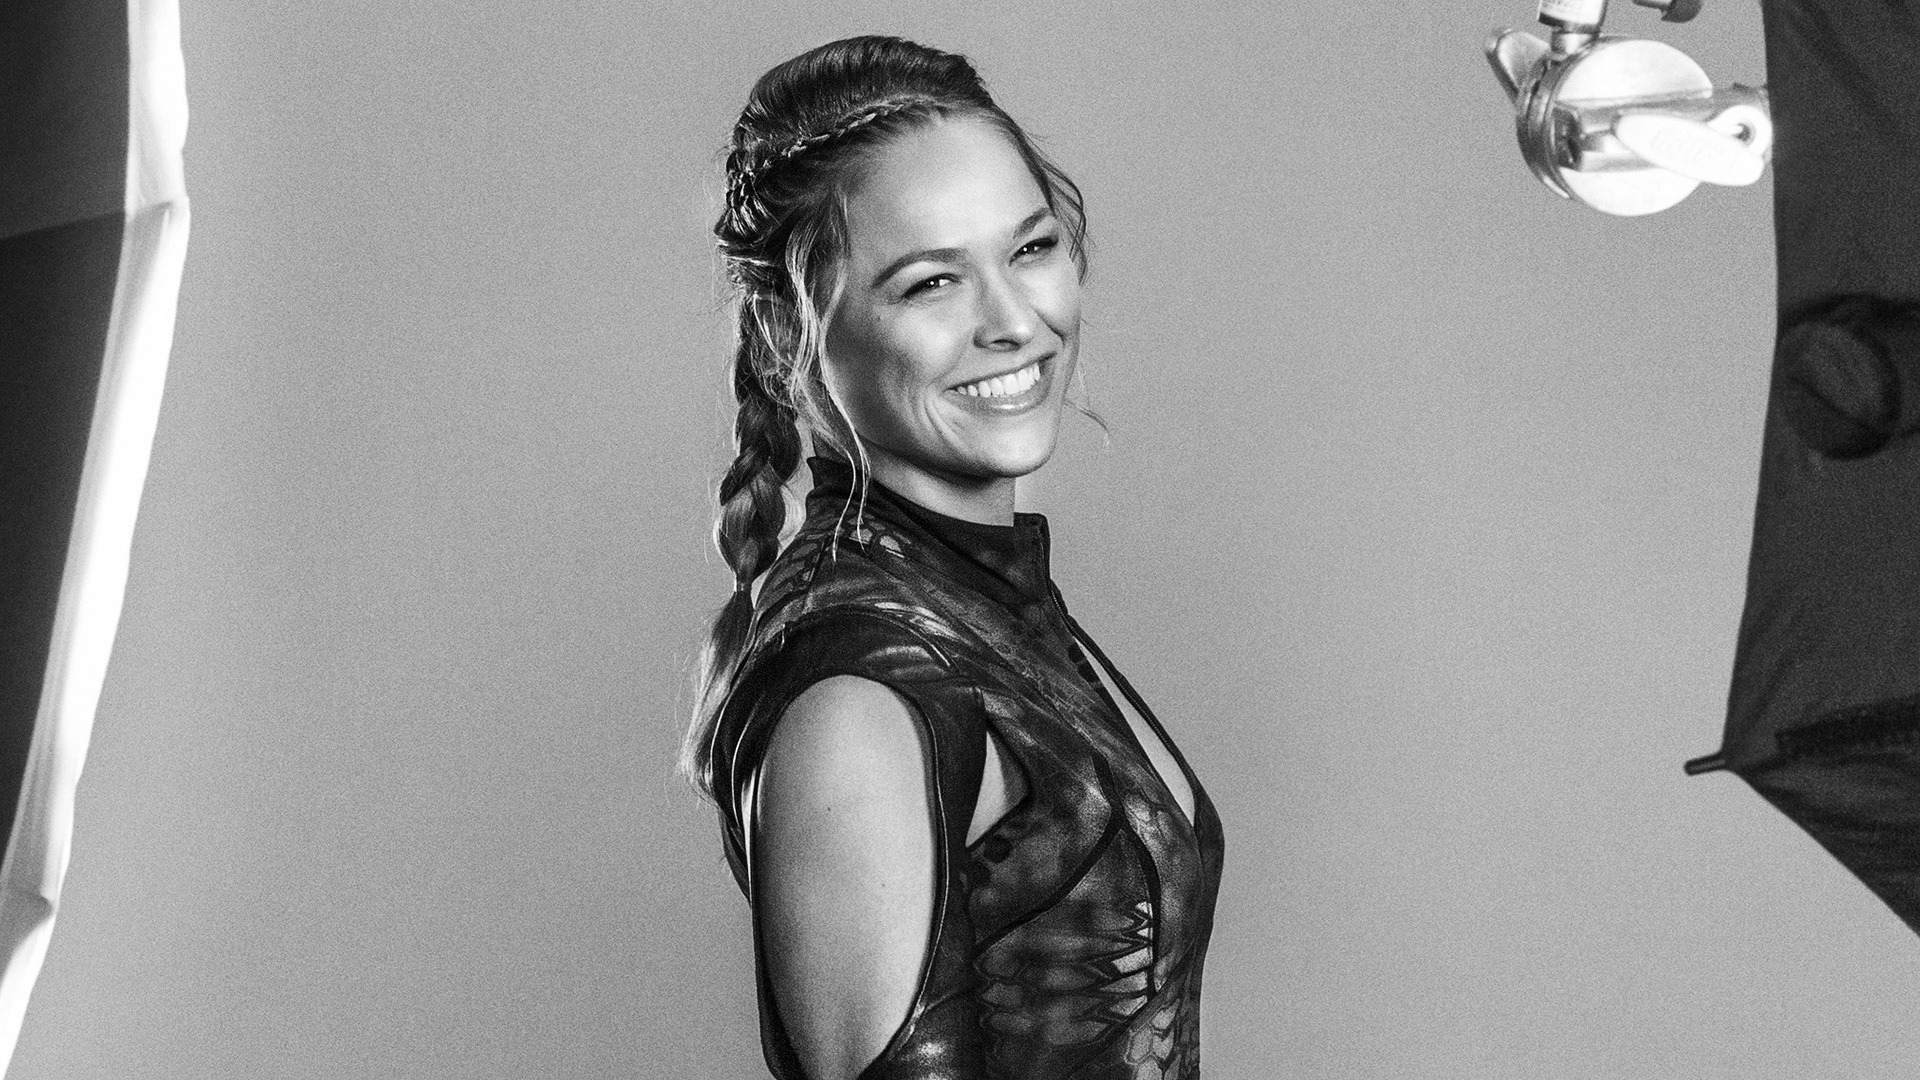 Ronda Rousey The Expendables 3 for 1920 x 1080 HDTV 1080p resolution